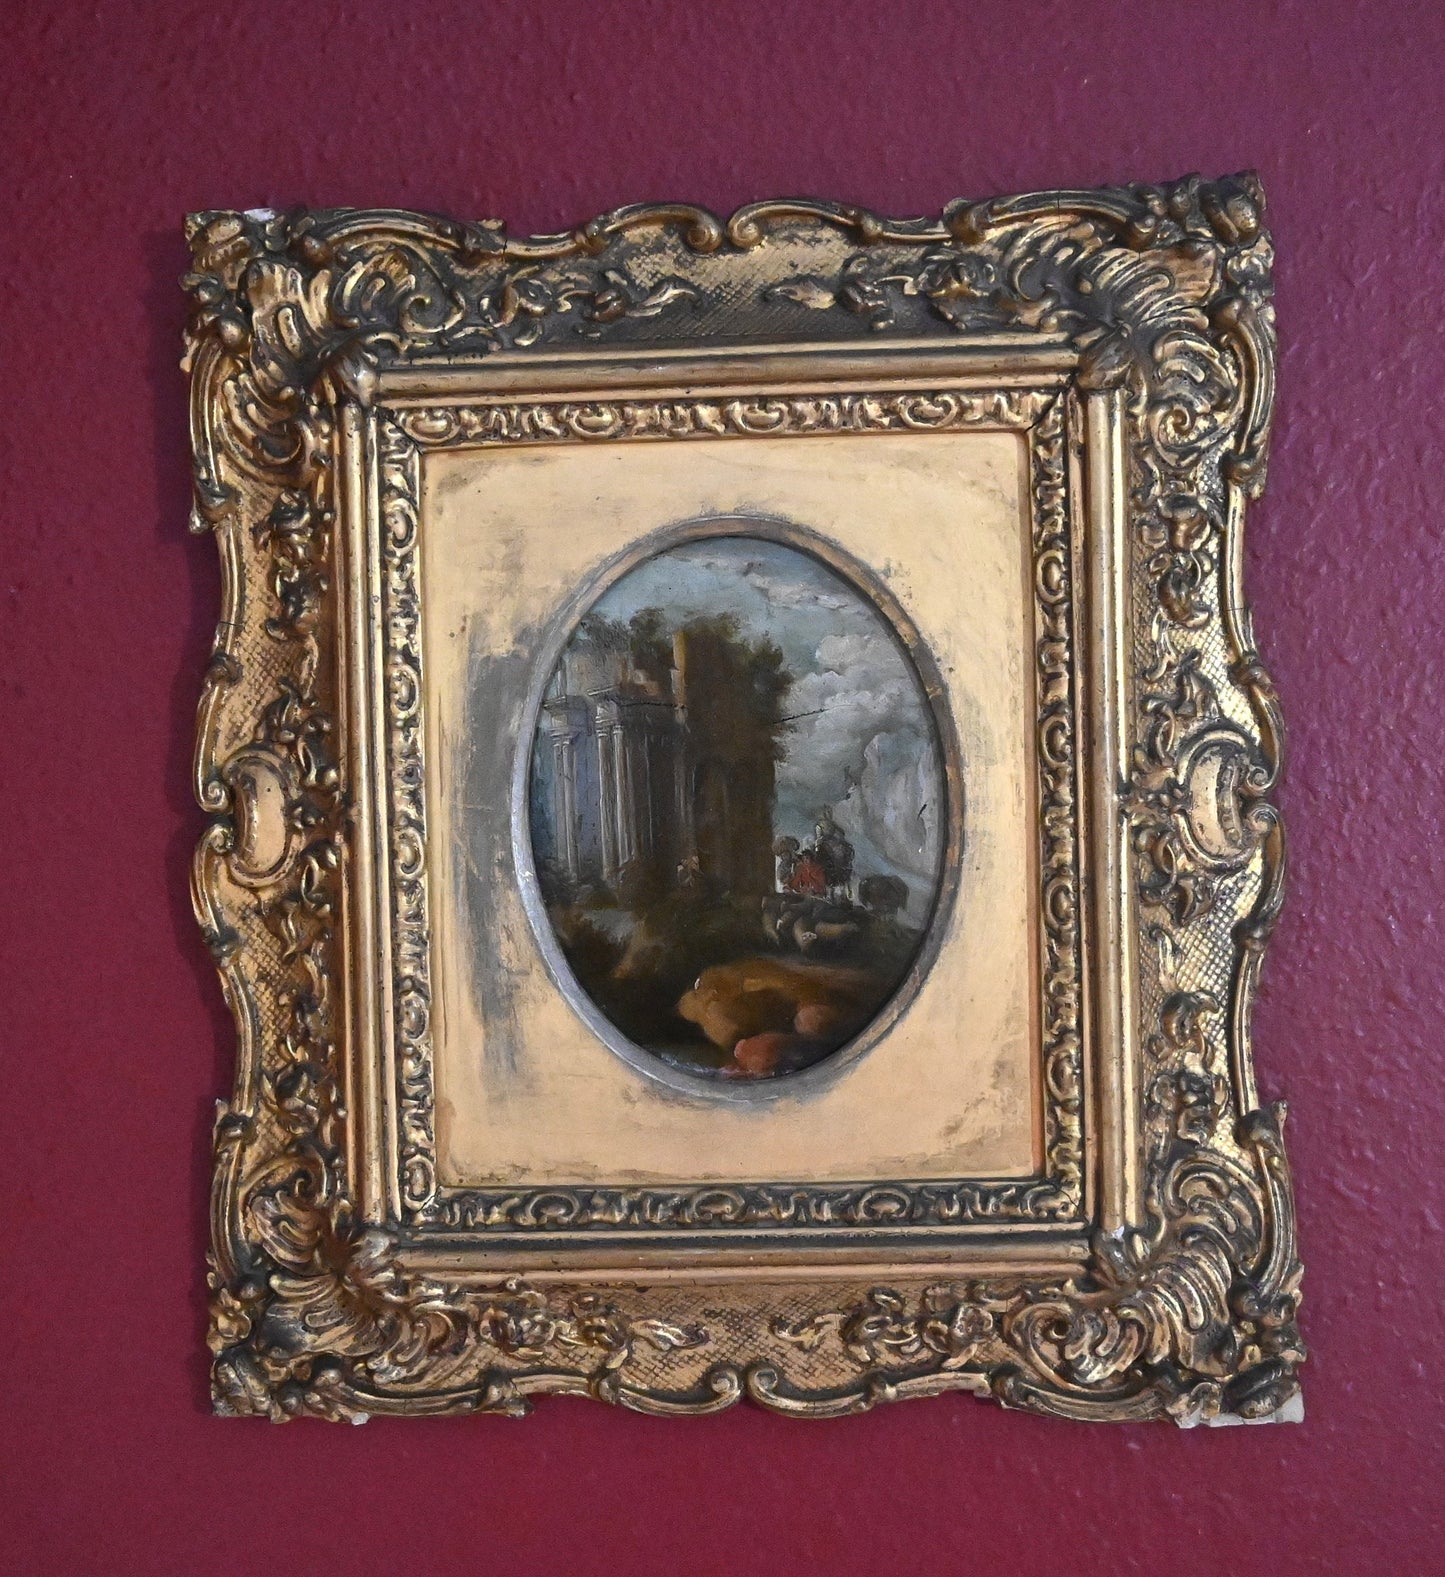 1700's Classical Ruin Master Painting on Copper circle of Charles Louis Clerisseau (French 1721-1820) 27 cm by 23.5 cm) period frame